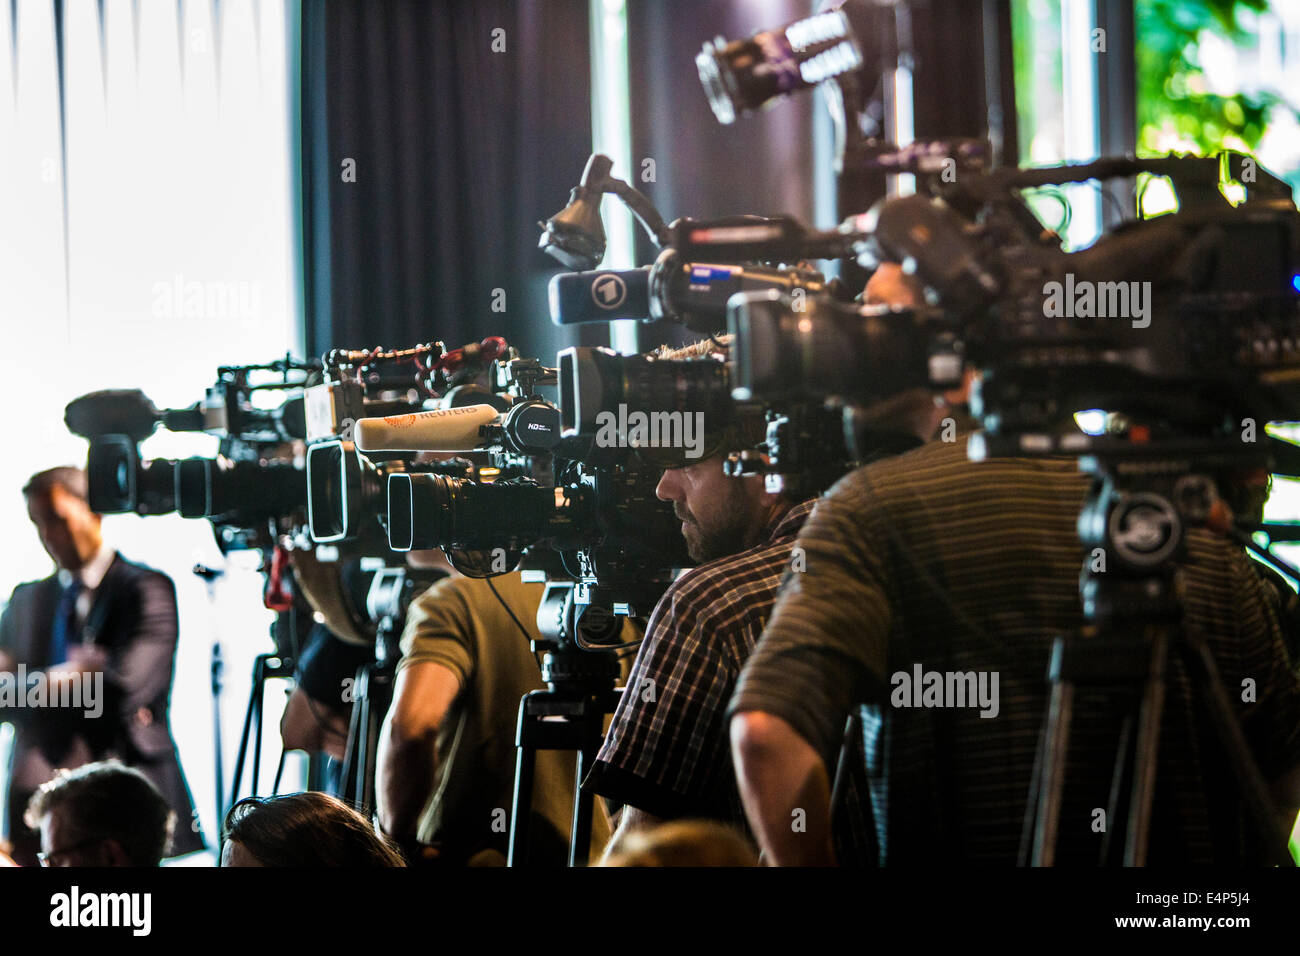 Media, camera, TV cameras on tripods, at a press conference, Stock Photo